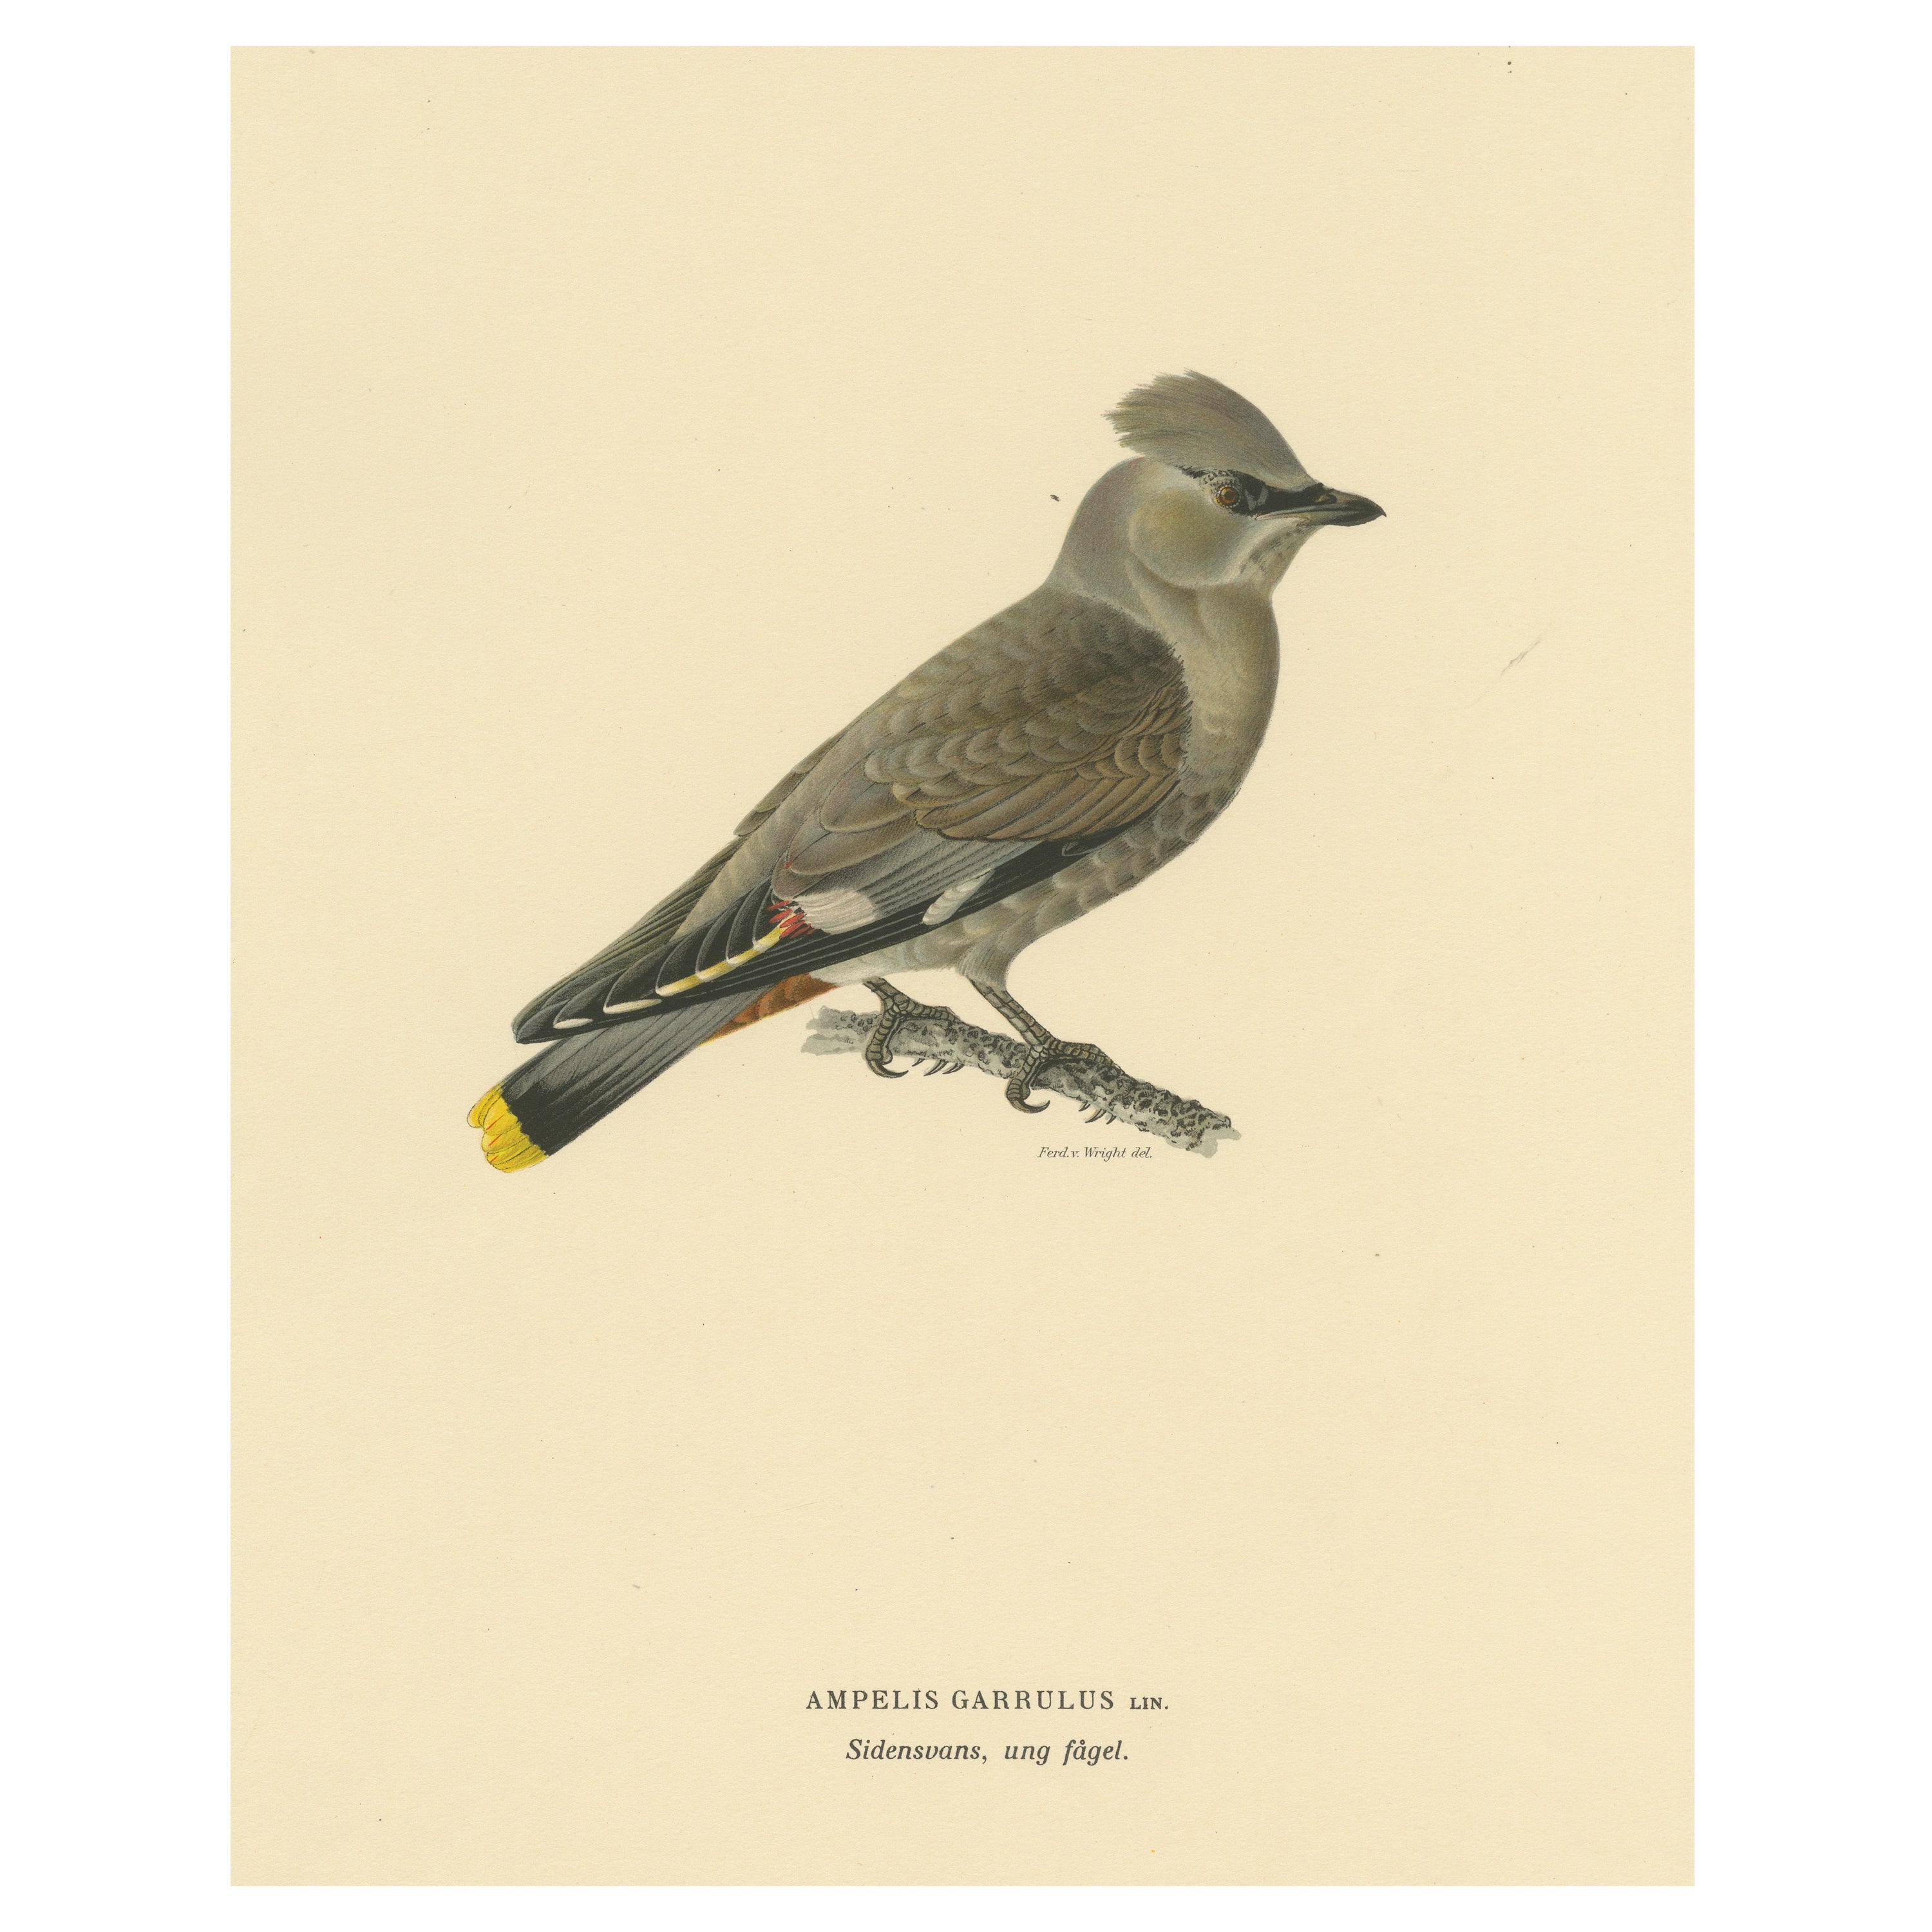 Graceful Nomad: A Portrait of the Juvenile Bohemian Waxwing by Magnus von Wright